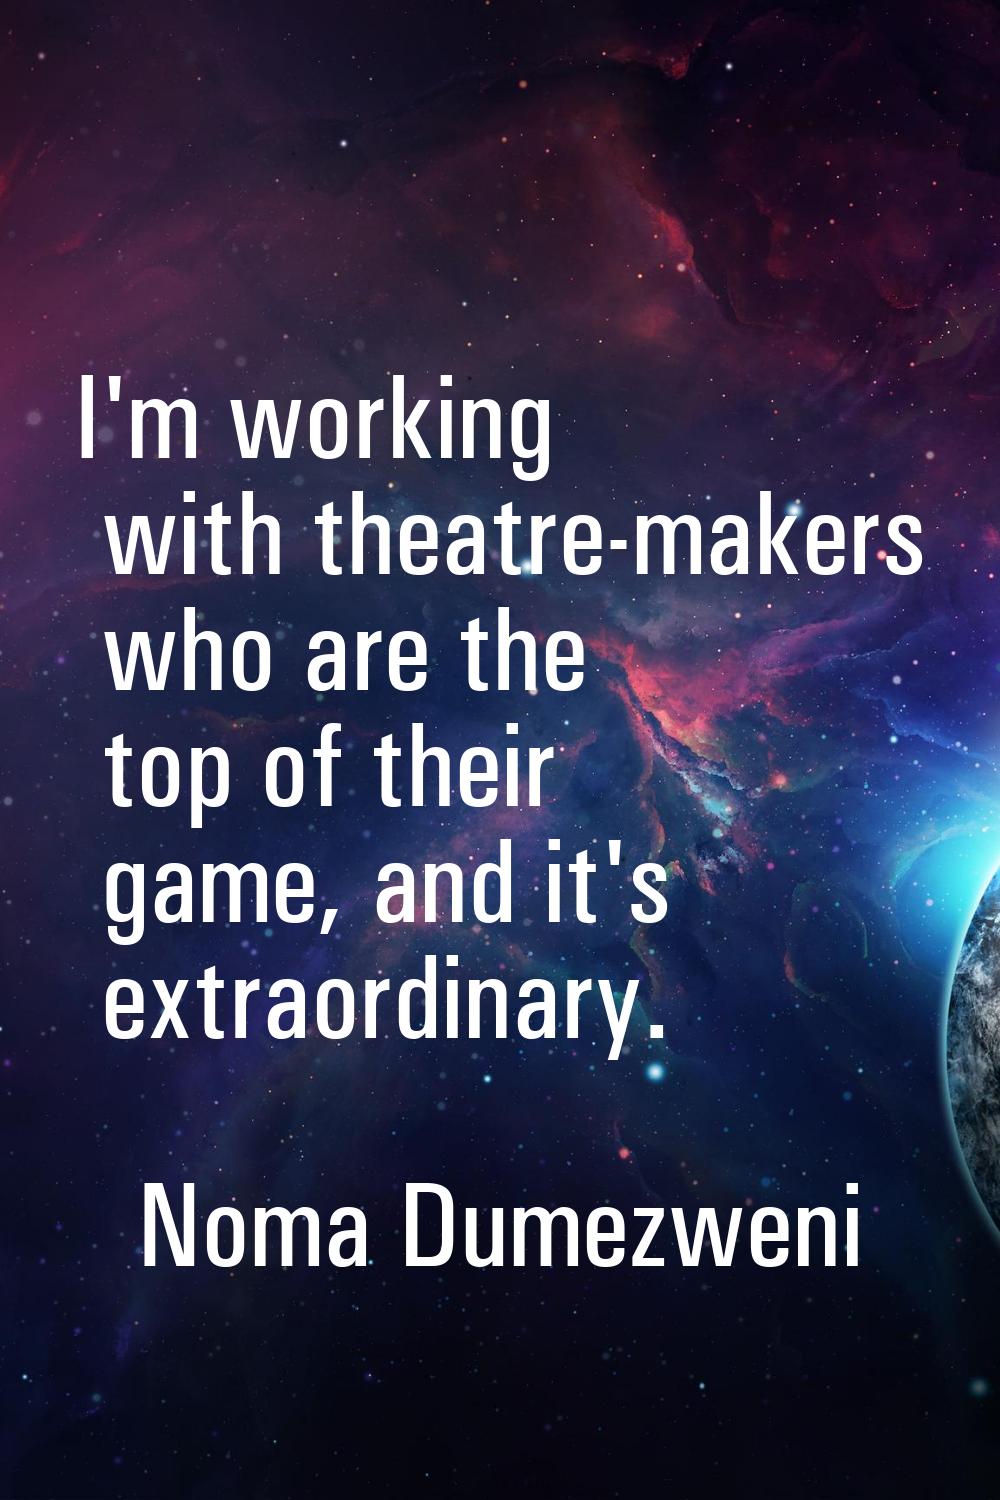 I'm working with theatre-makers who are the top of their game, and it's extraordinary.